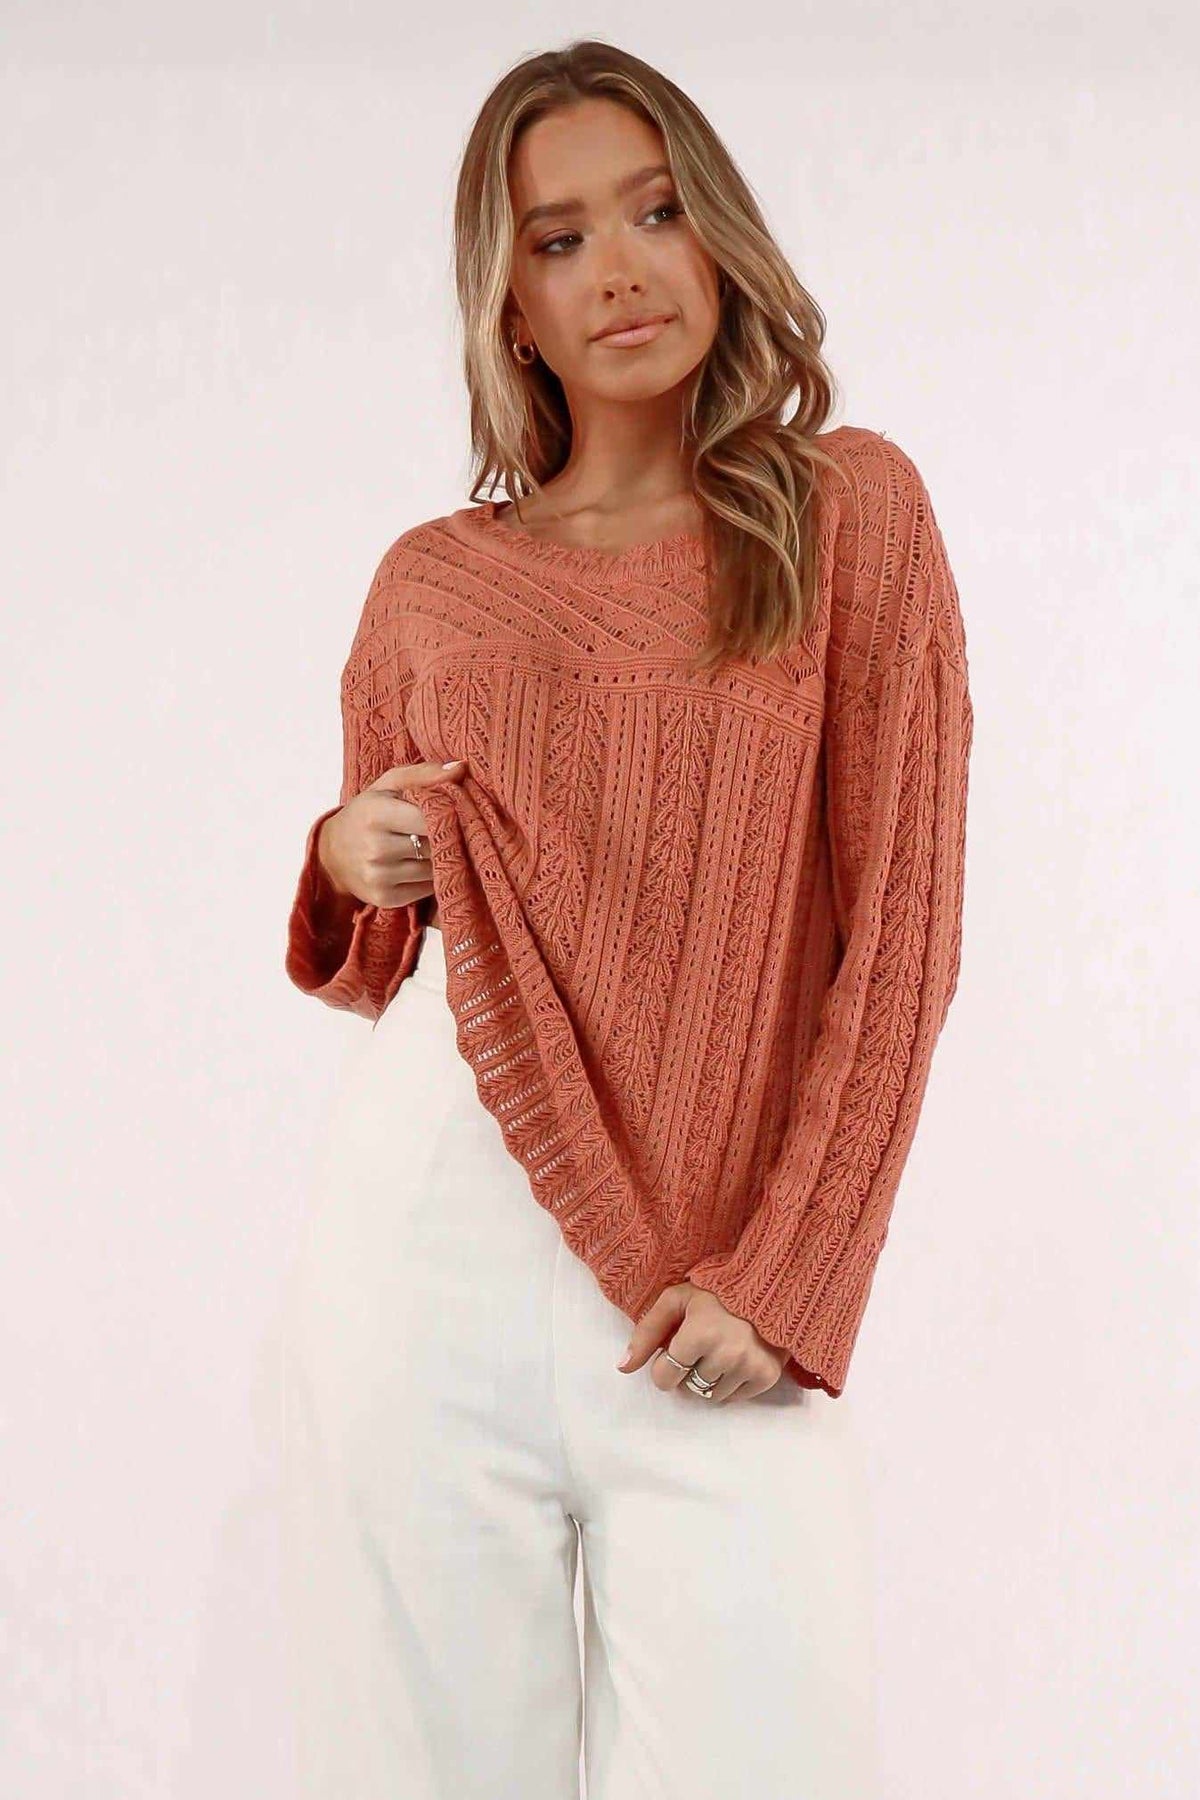 Gillia Top, COTTON, LONG SLEEVE, ORANGE, Sale, TOP, TOPS, Our New Gillia Top Is Now Only $61.00 Exclusive At Mishkah, Our New Gillia Top is now only $61.00-We Have The Latest Women&#39;s Tops @ Mishkah Online Fashion Boutique-MISHKAH